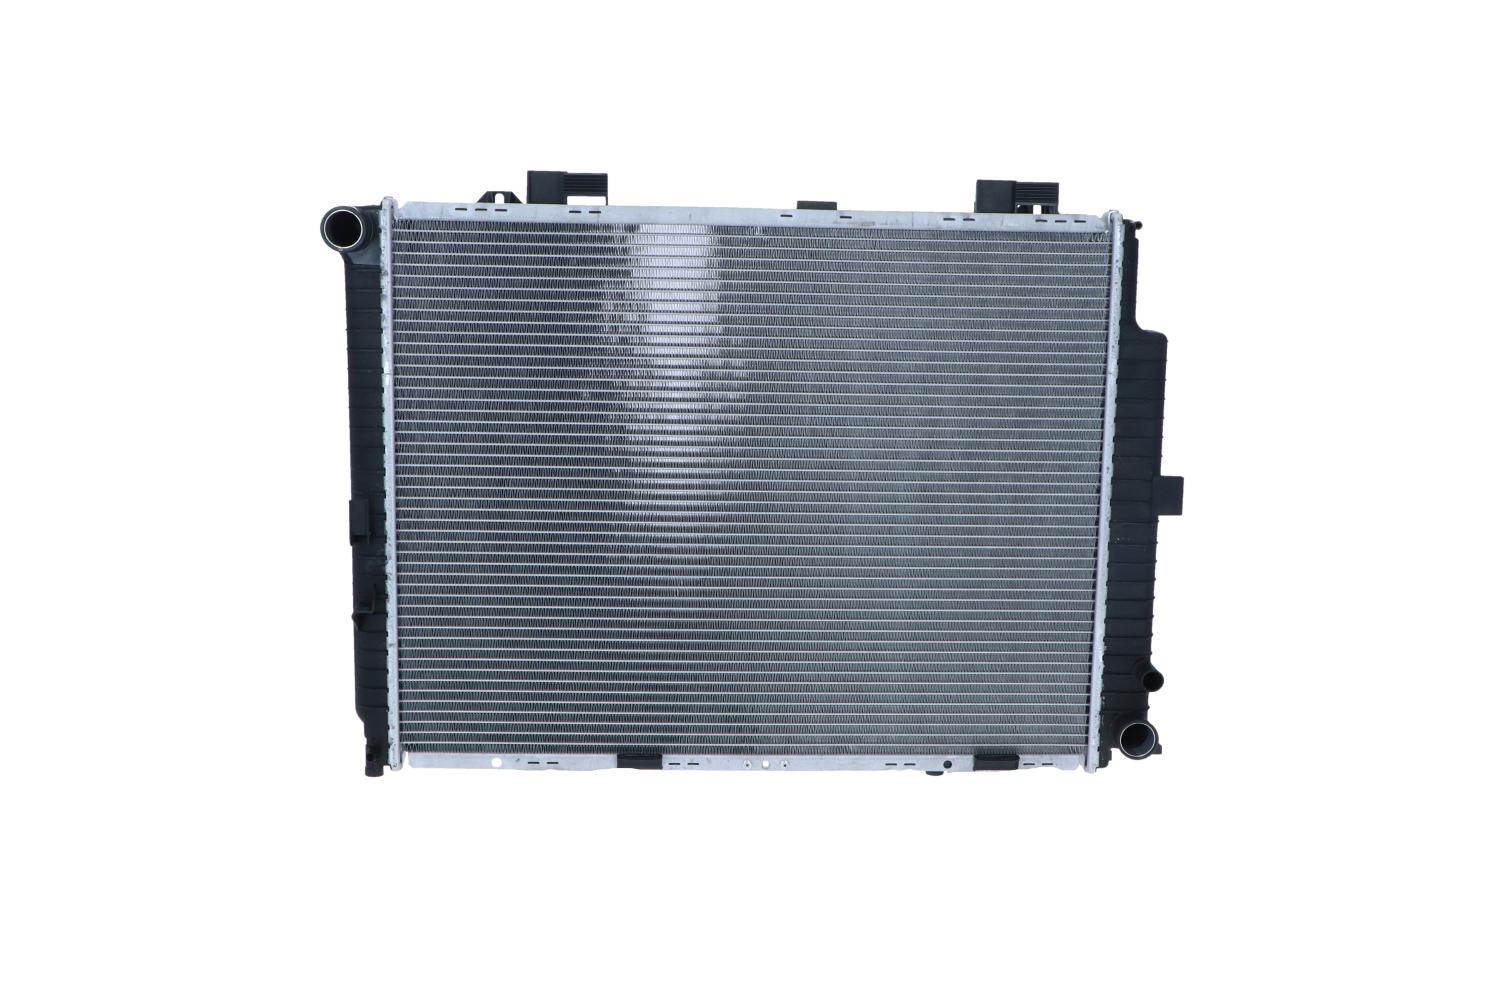 NRF 50575 Engine radiator Aluminium, 641 x 488 x 42 mm, with mounting parts, Brazed cooling fins